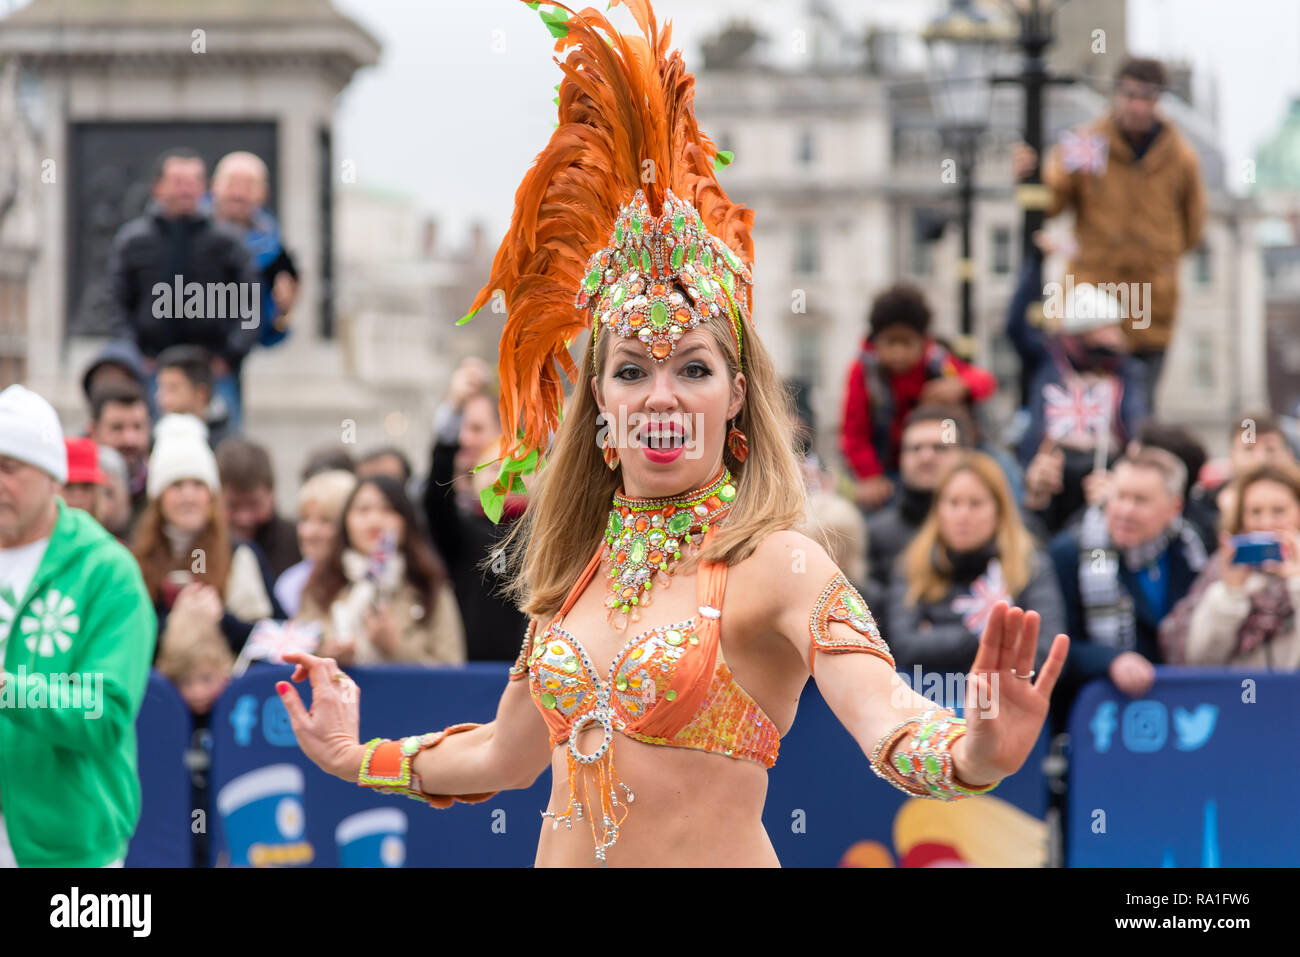 London, UK.  30 December 2018  Some of London New Year Day Parade’s best performers kick-starting festivities in front of the World famous National Gallery, Trafalgar Square, London, UK. Acts include The London School of Samba, which have been helping people to experience Brazilian Carnival culture since 1984.  Credit: Ilyas Ayub / Alamy Live News Stock Photo